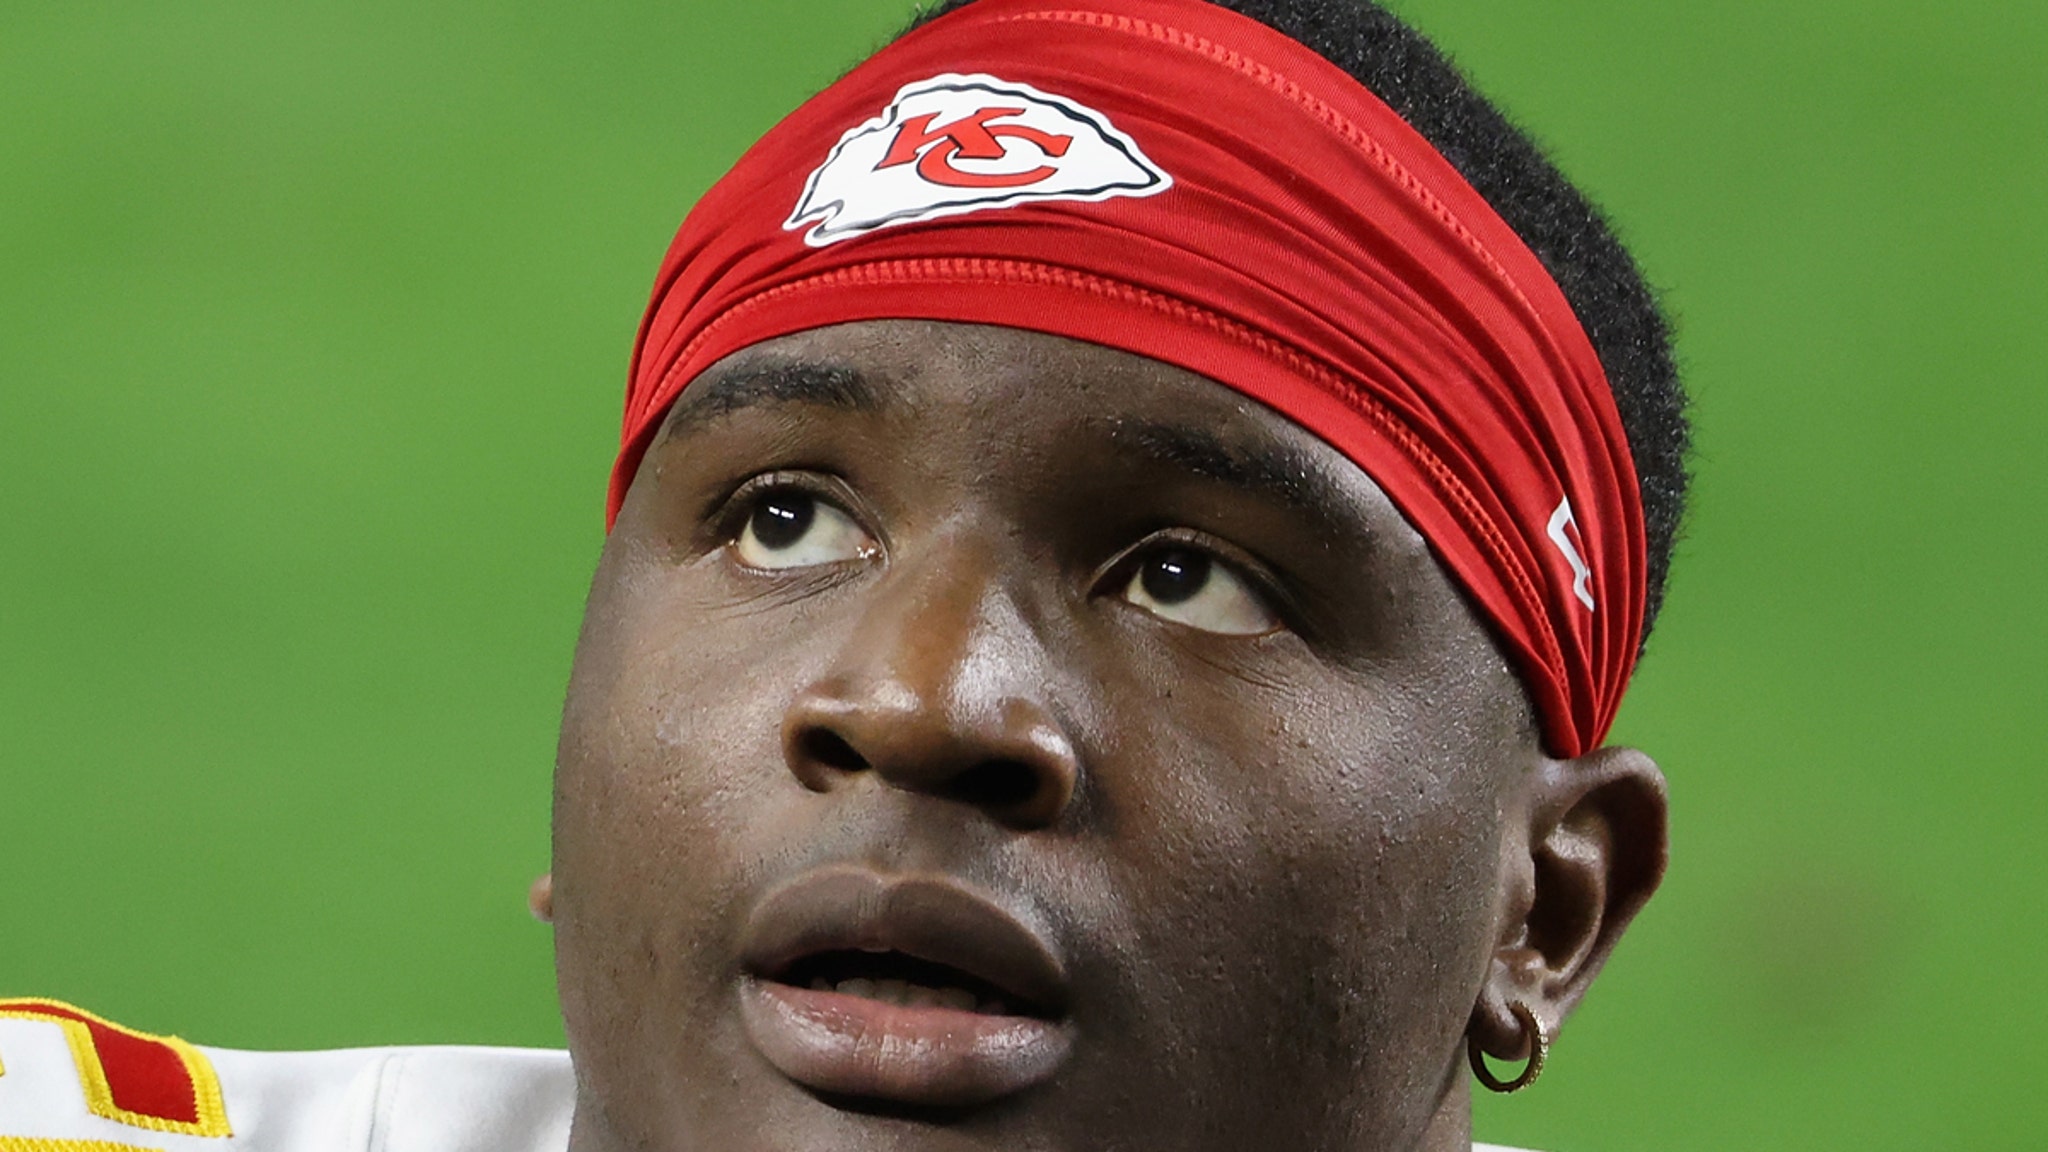 Chiefs’ Willie Gay Agrees To Take Mental Health Counseling In Criminal Damage Case